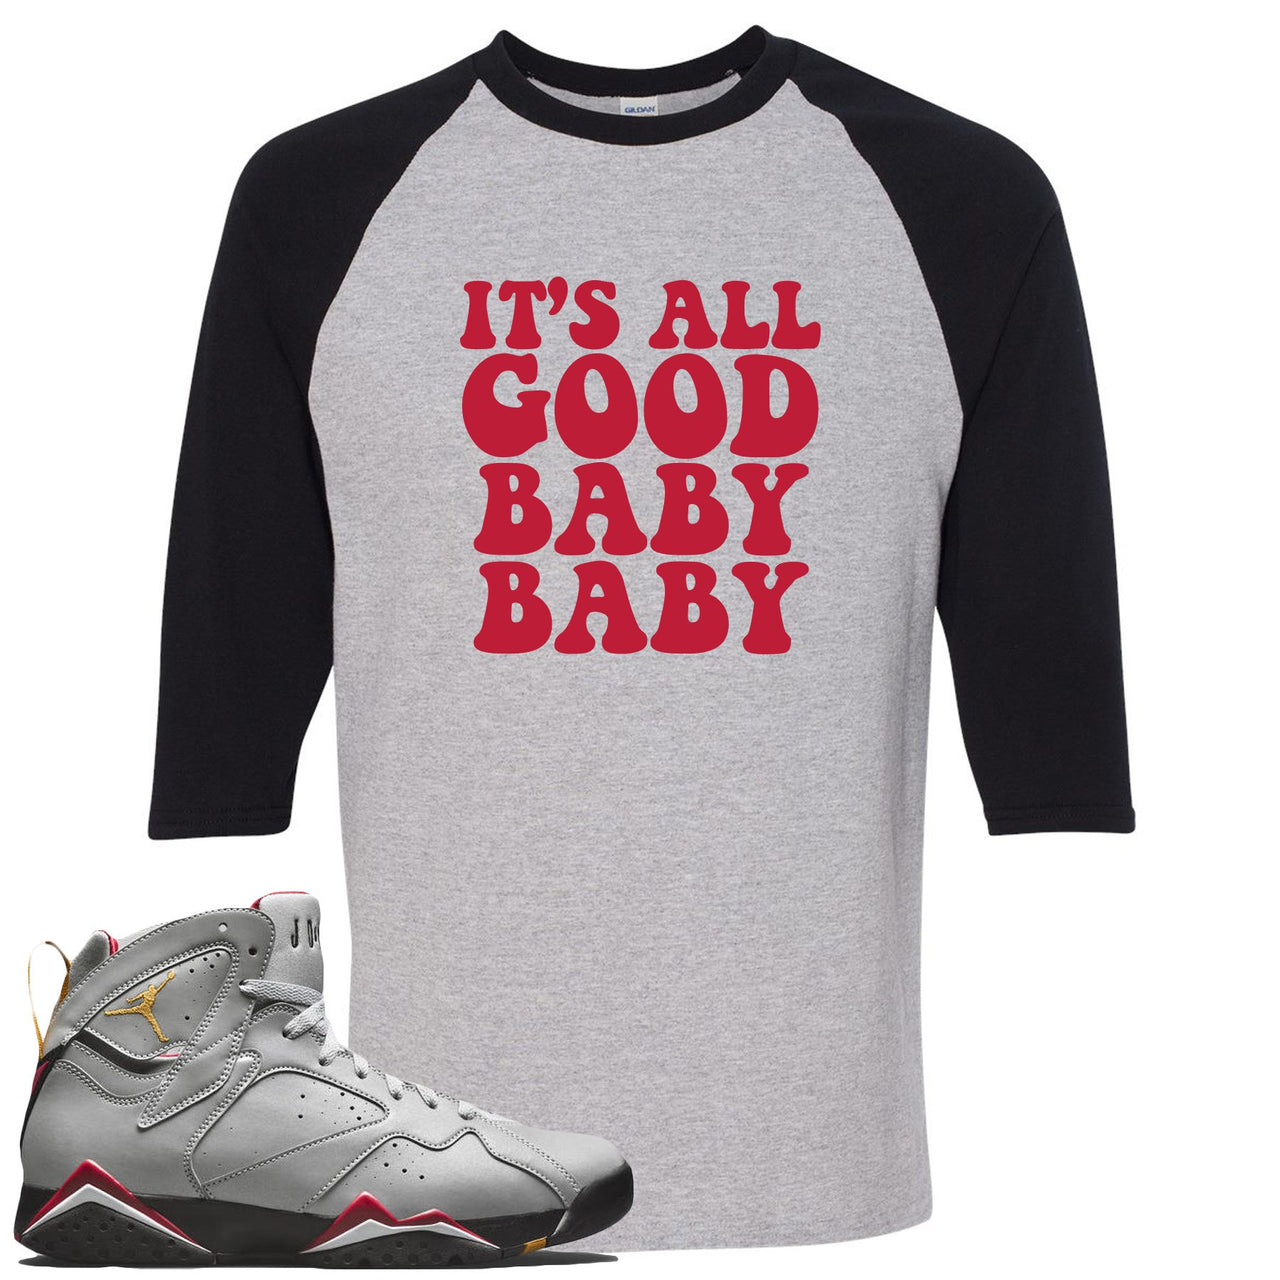 Reflections of a Champion 7s Raglan T Shirt | It's All Good Baby Baby, Sports Gray and Black